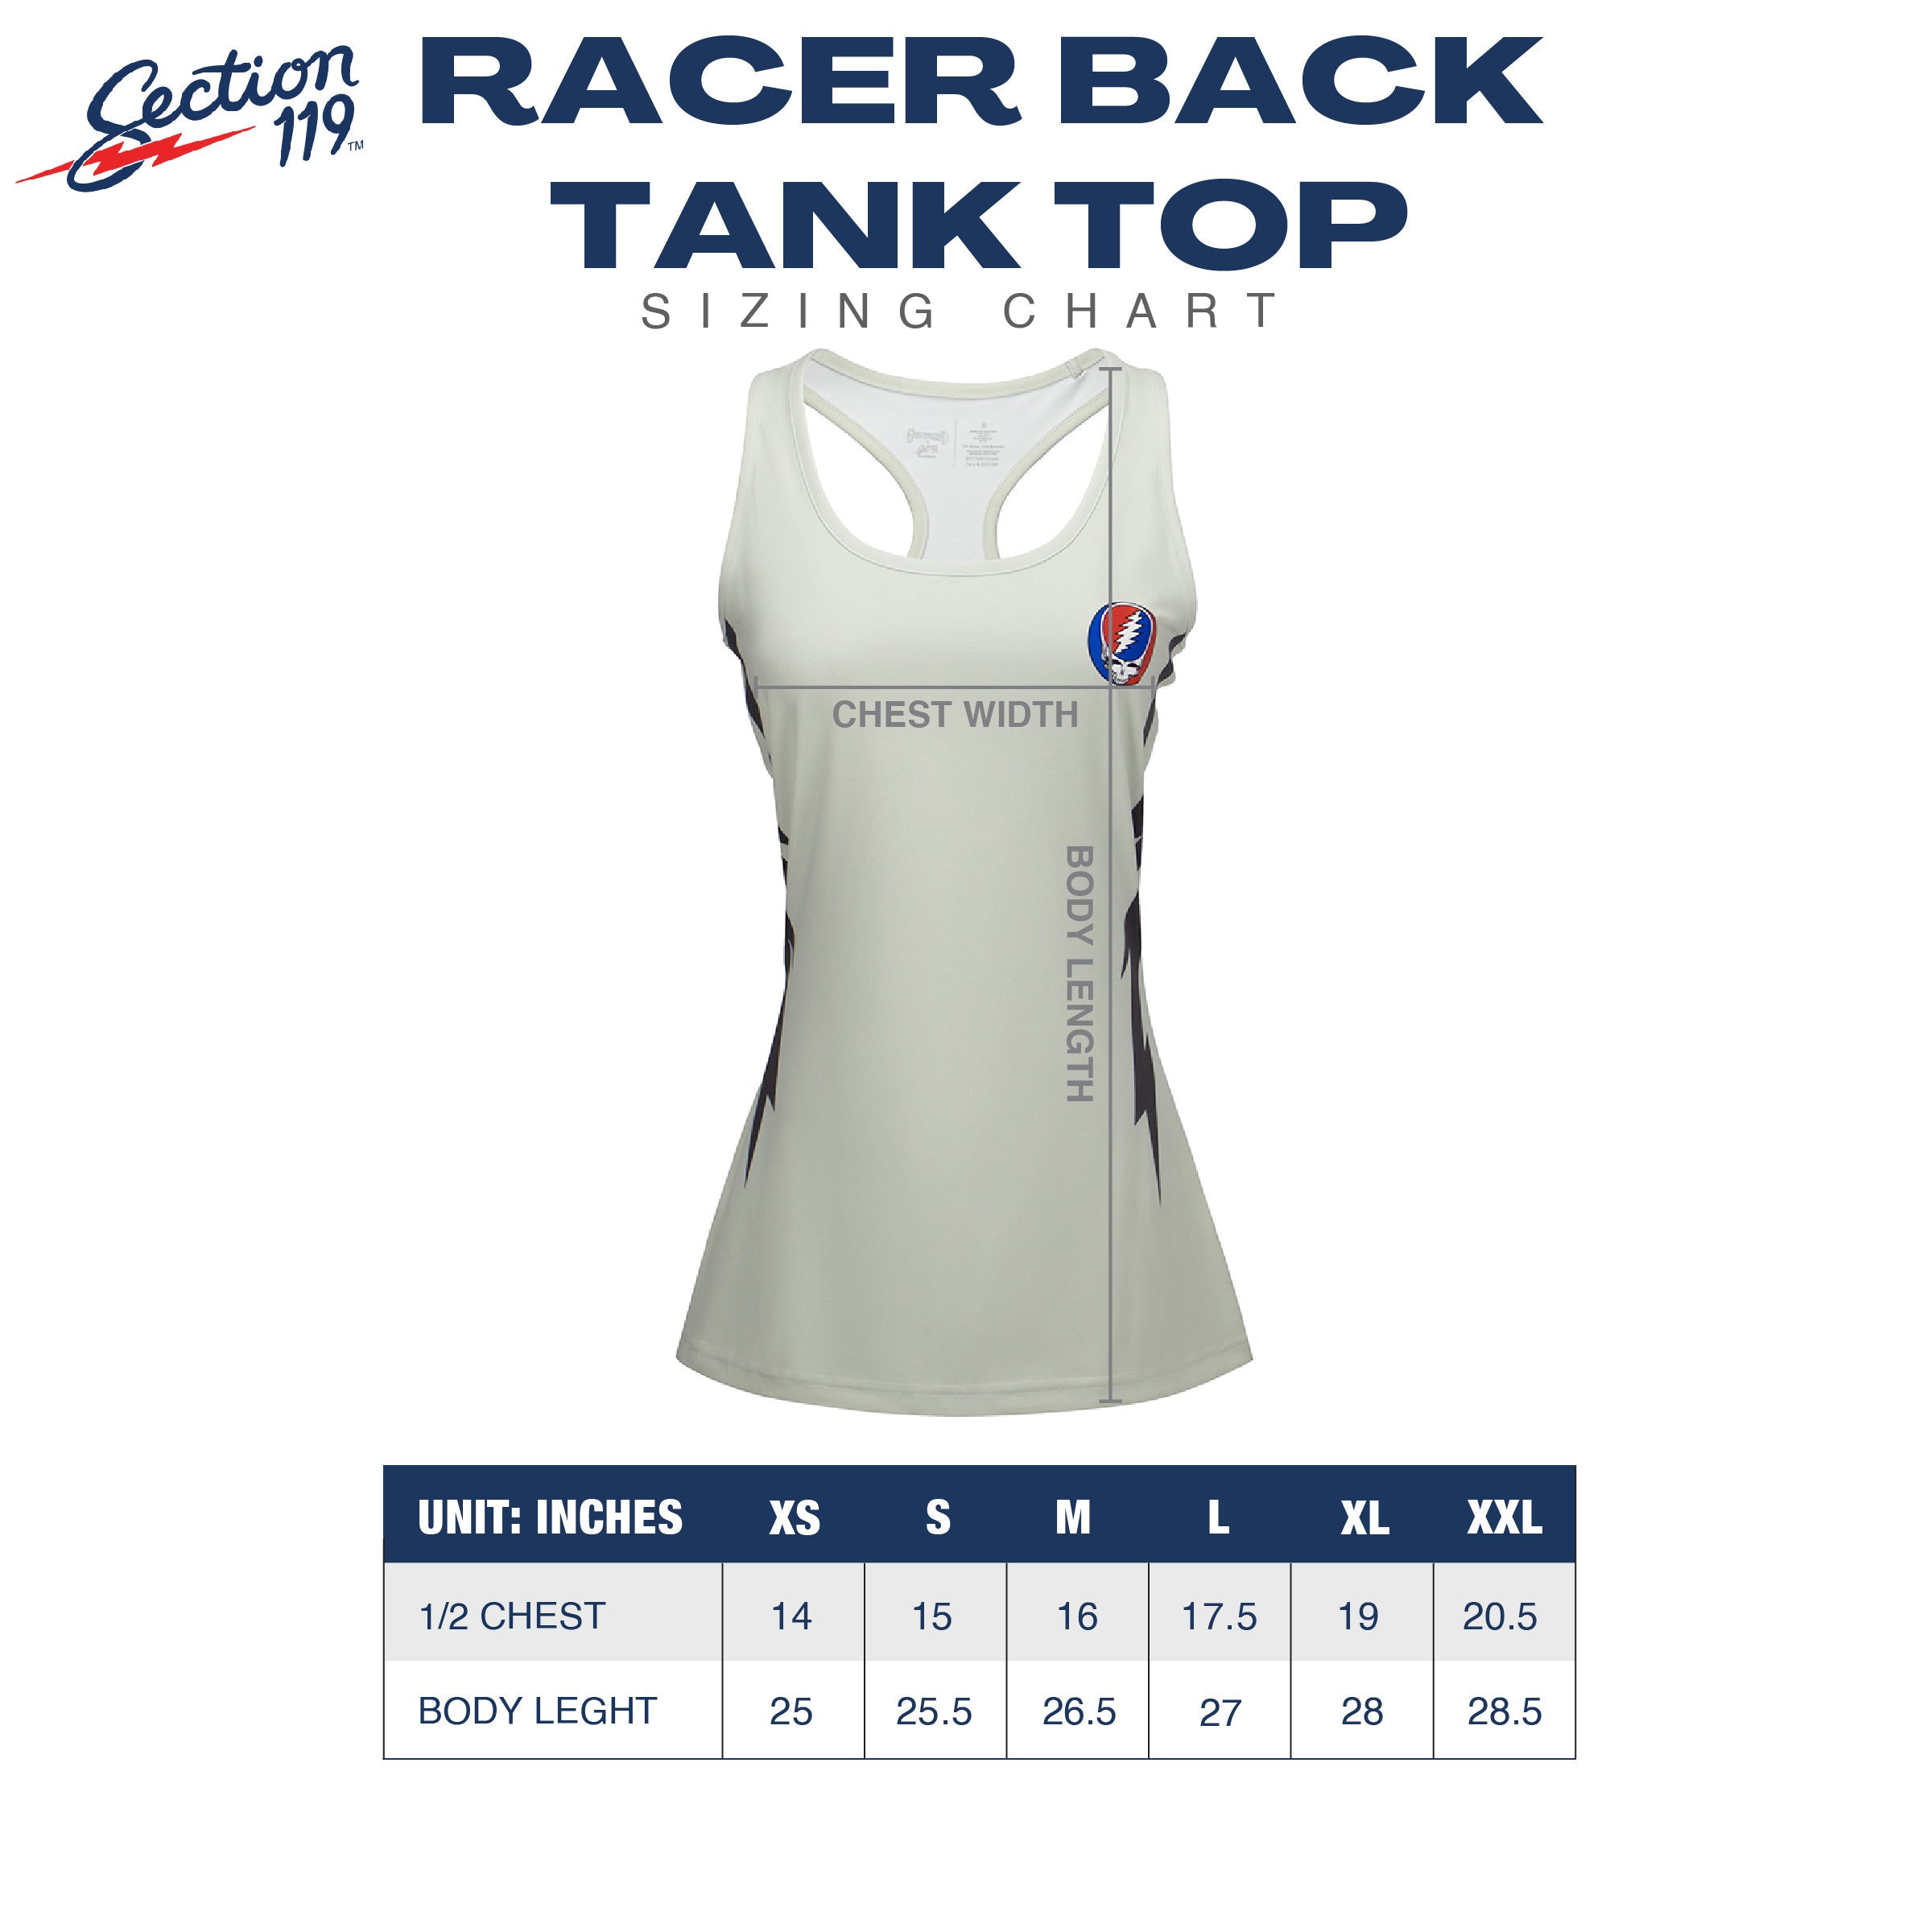 Grateful Dead Racer Back Tank Top Stealie On Red And Blue - Section 119